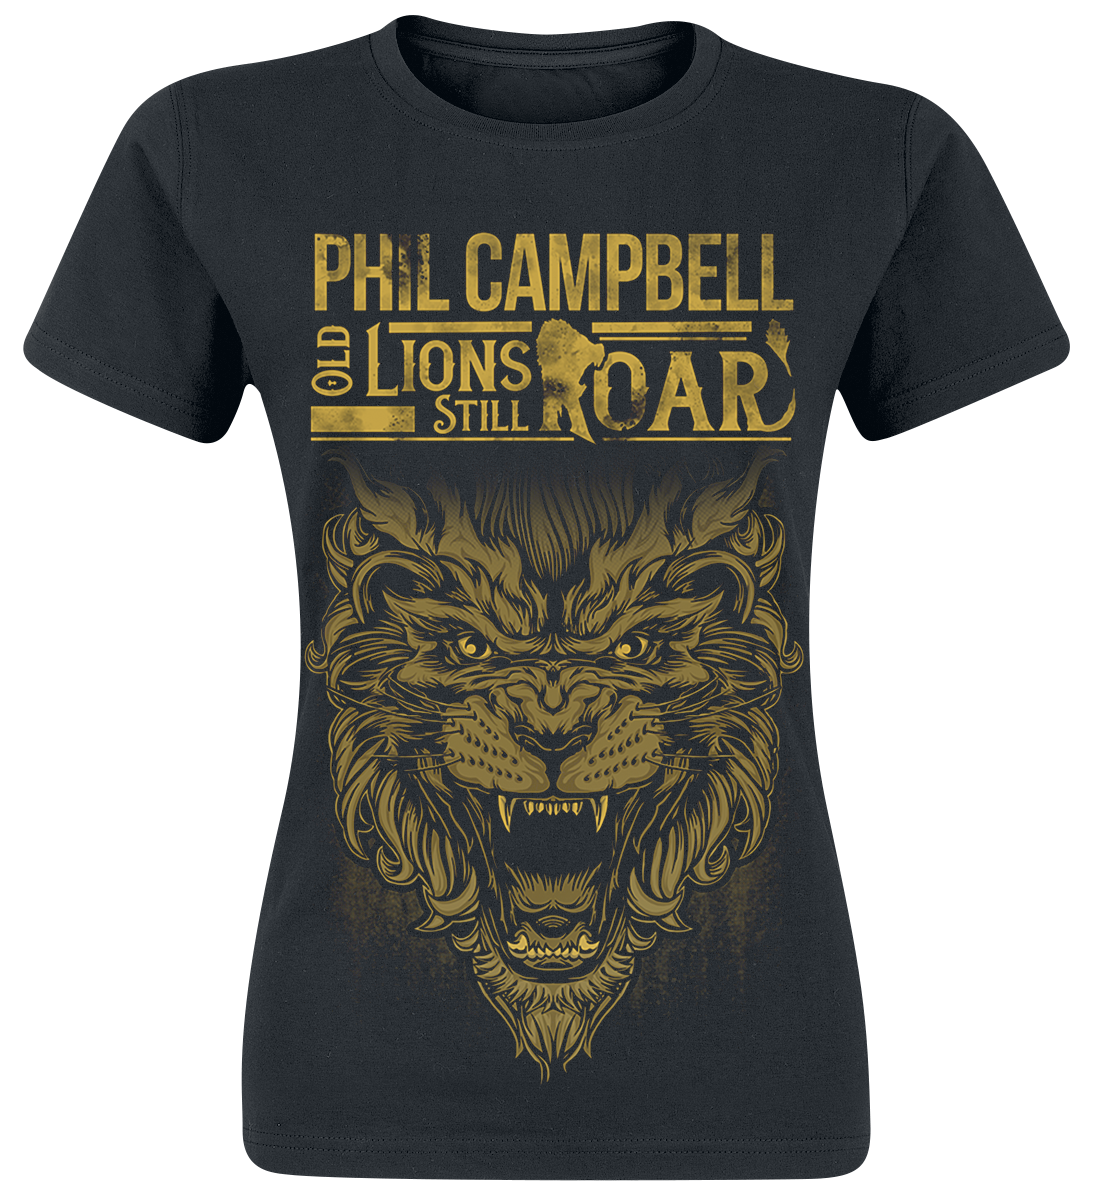 Phil Campbell - Old Lions - Girls shirt - black image